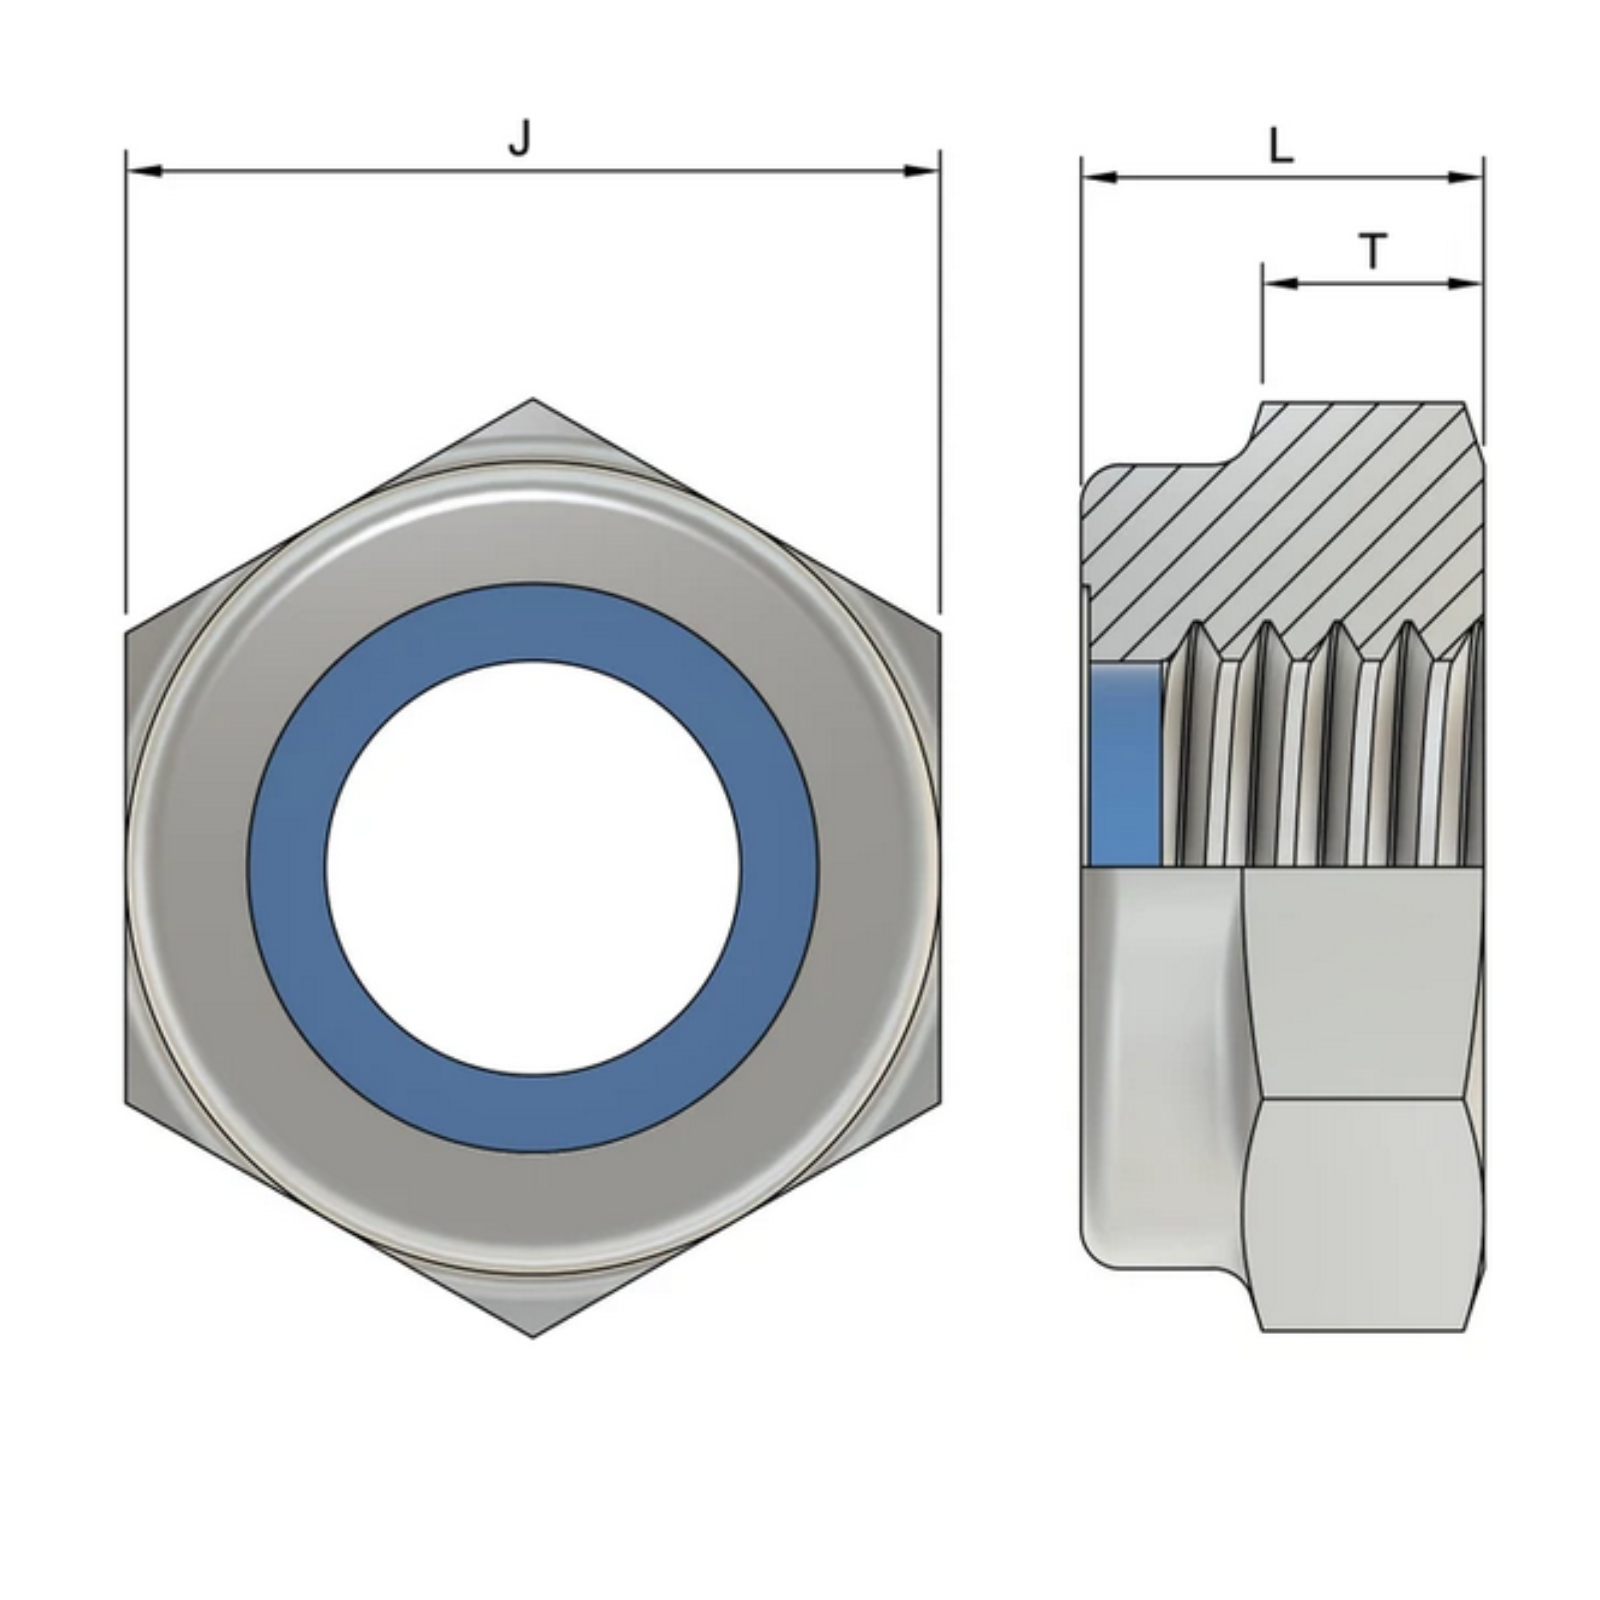 M6 Hexagon Nylon Locking Nuts (DIN 985) - Stainless Steel (A4)